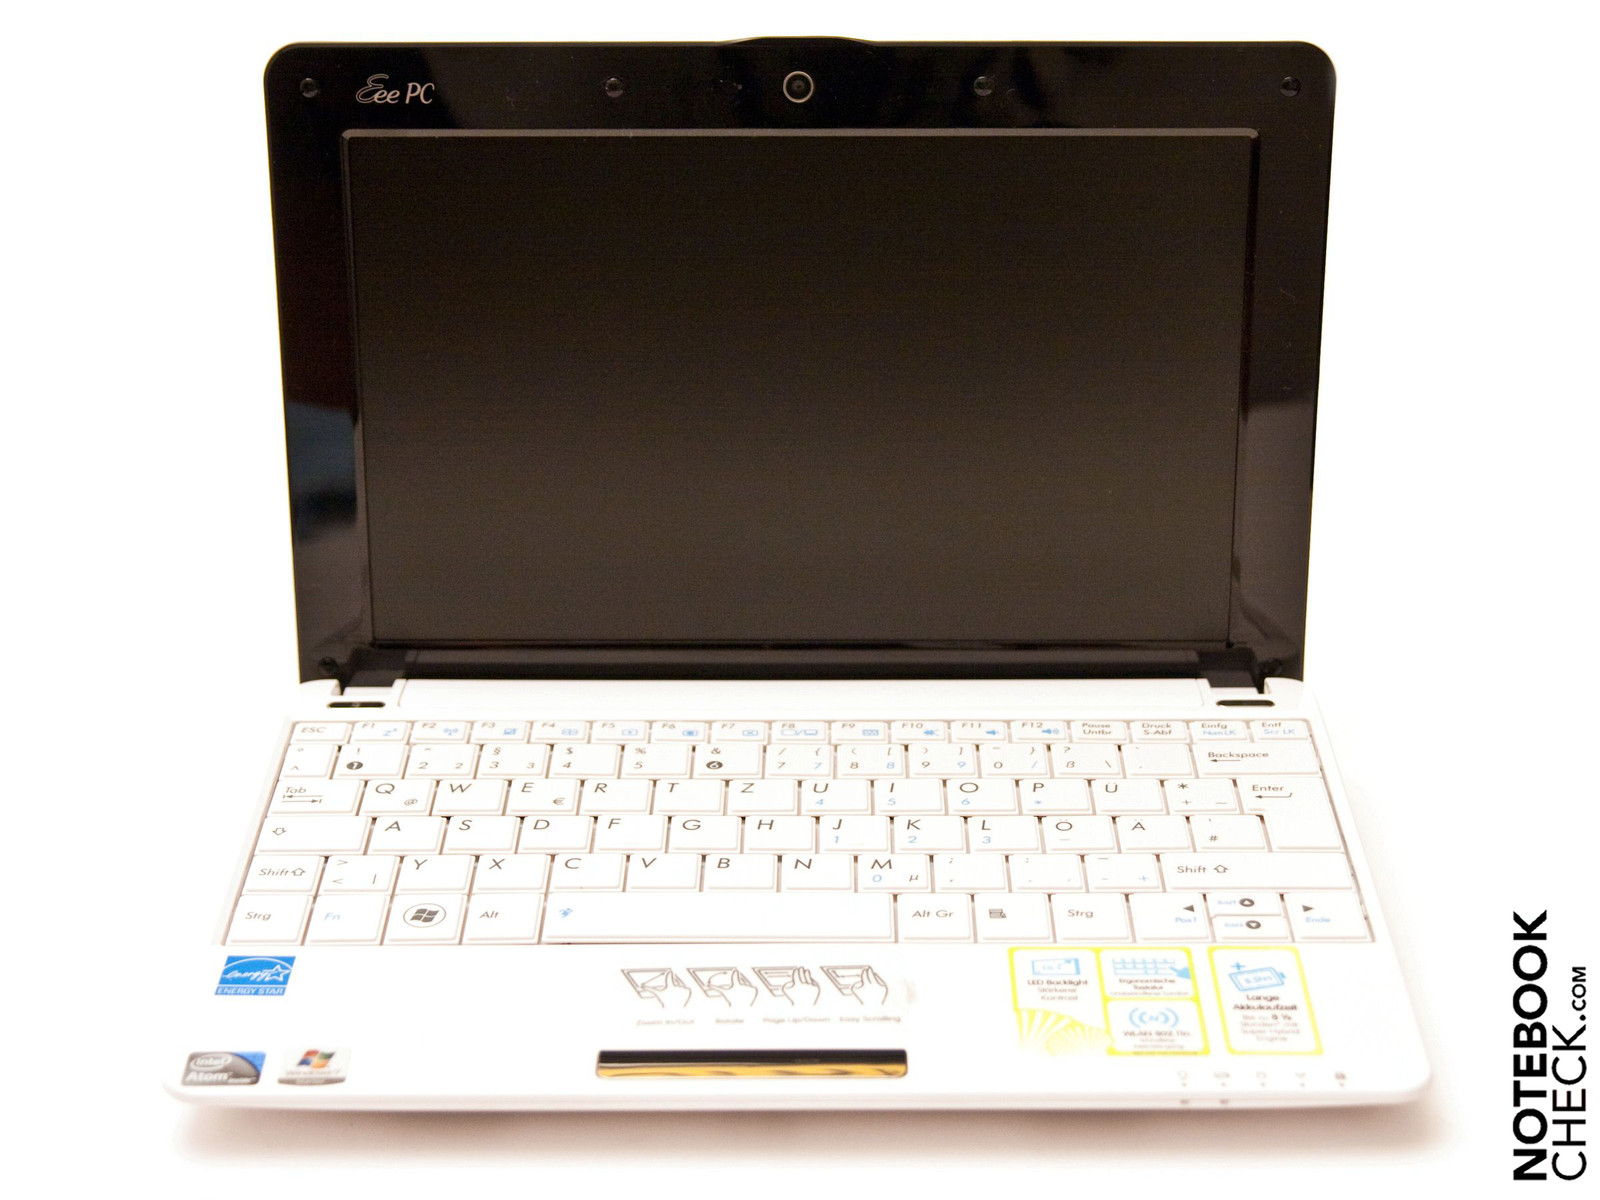 Review Asus Eee Pc 1005ha M Win7 Netbook Notebookcheck Net Reviews